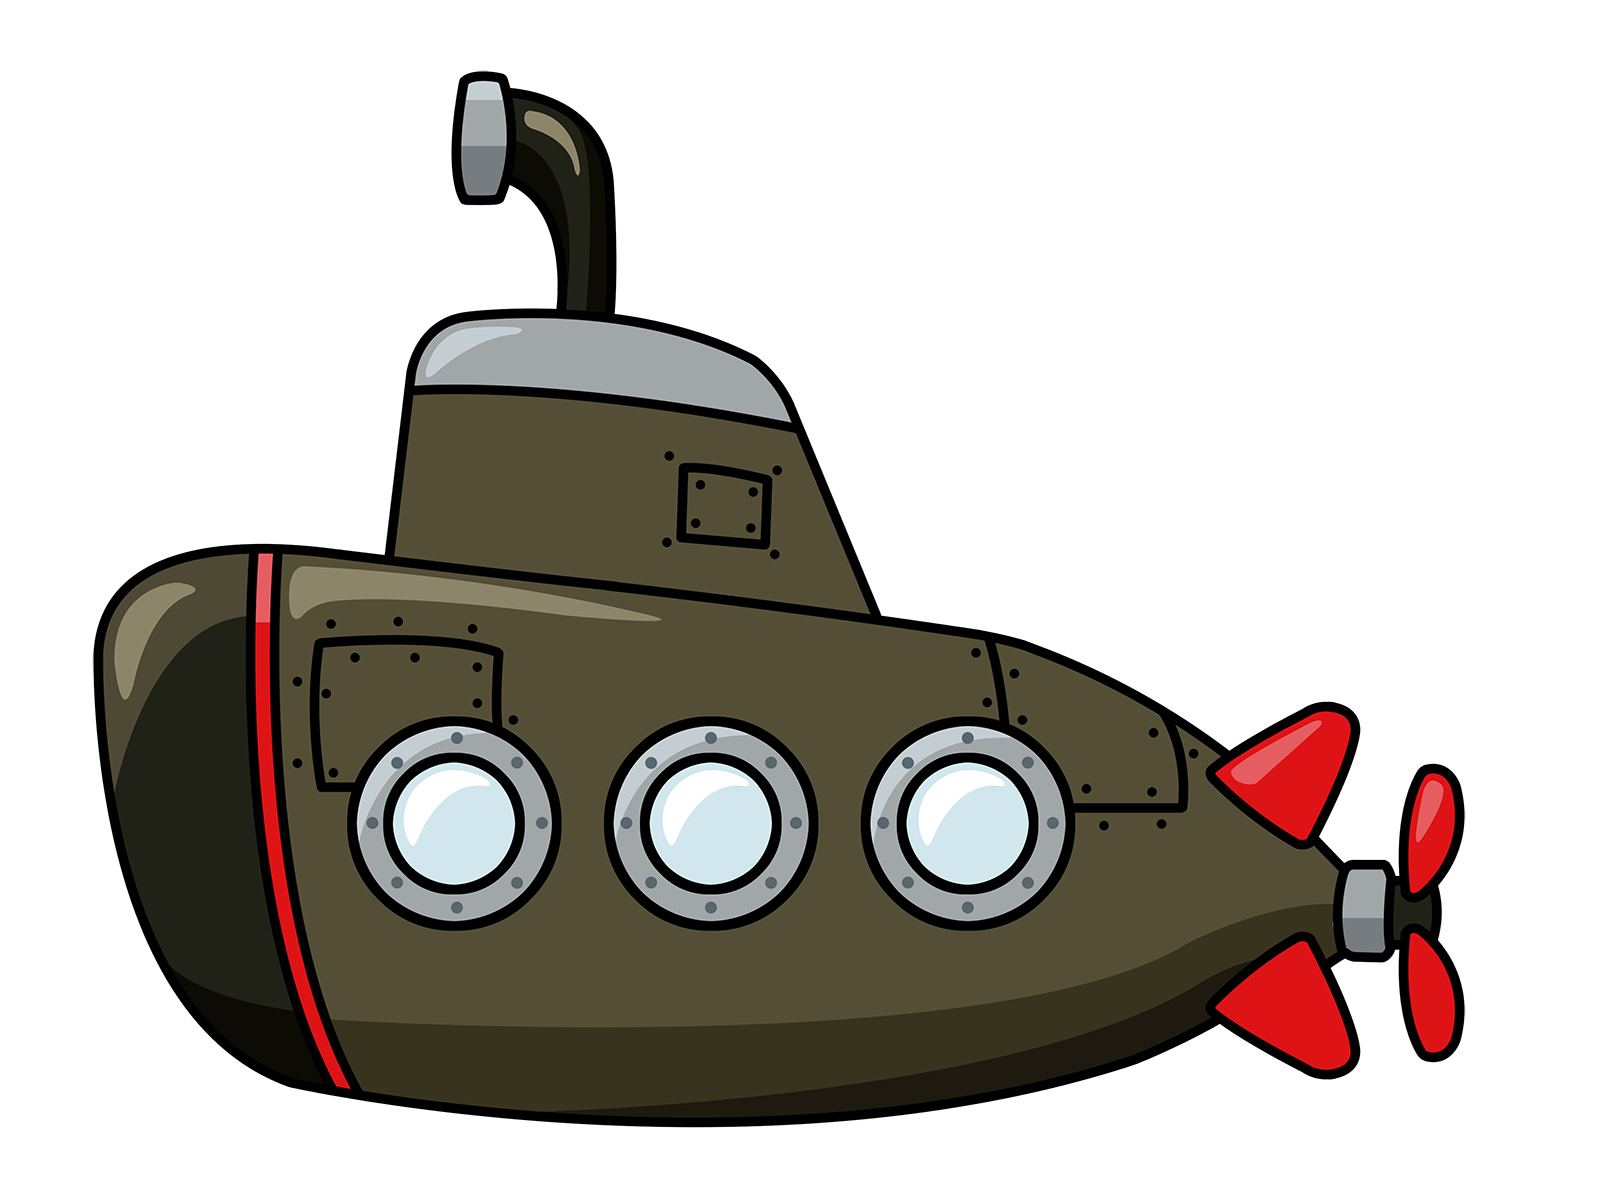 Submarine 20clipart | Clipart Panda - Free Clipart Images | Conklin Mini Golf | Pinterest | Free clipart images, Cartoon and Public domain